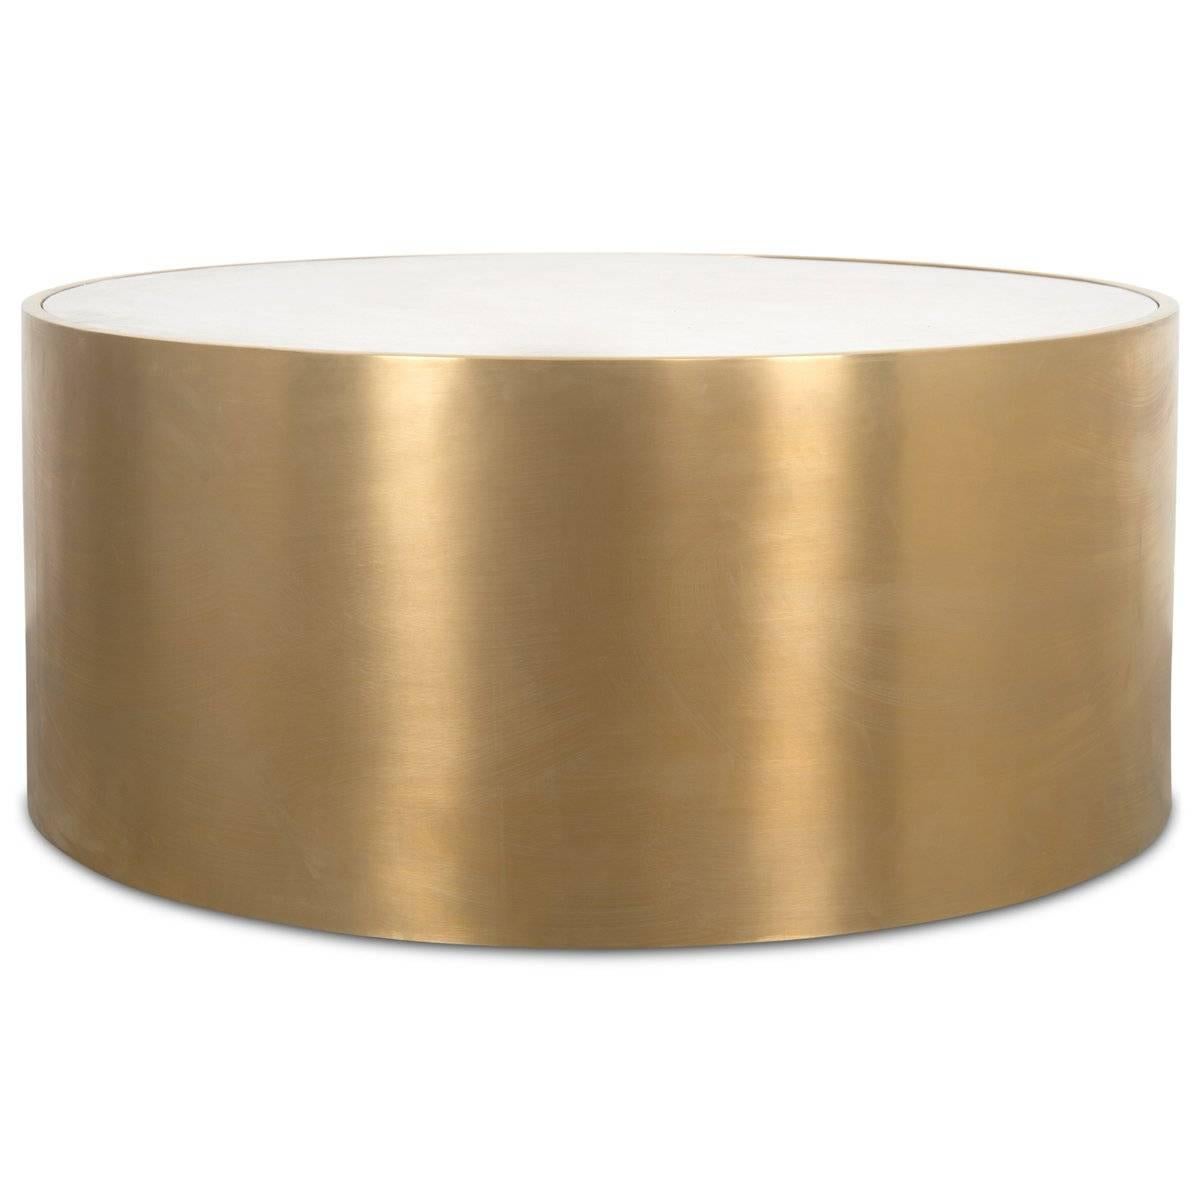 This beautifully handcrafted coffee table is sure to impress. Featuring a stone-like concrete top in a soothing vanilla color and long brushed brass exterior, the Leon Coffee Table is bold and impactful in any space. 

Dimensions:
41.5